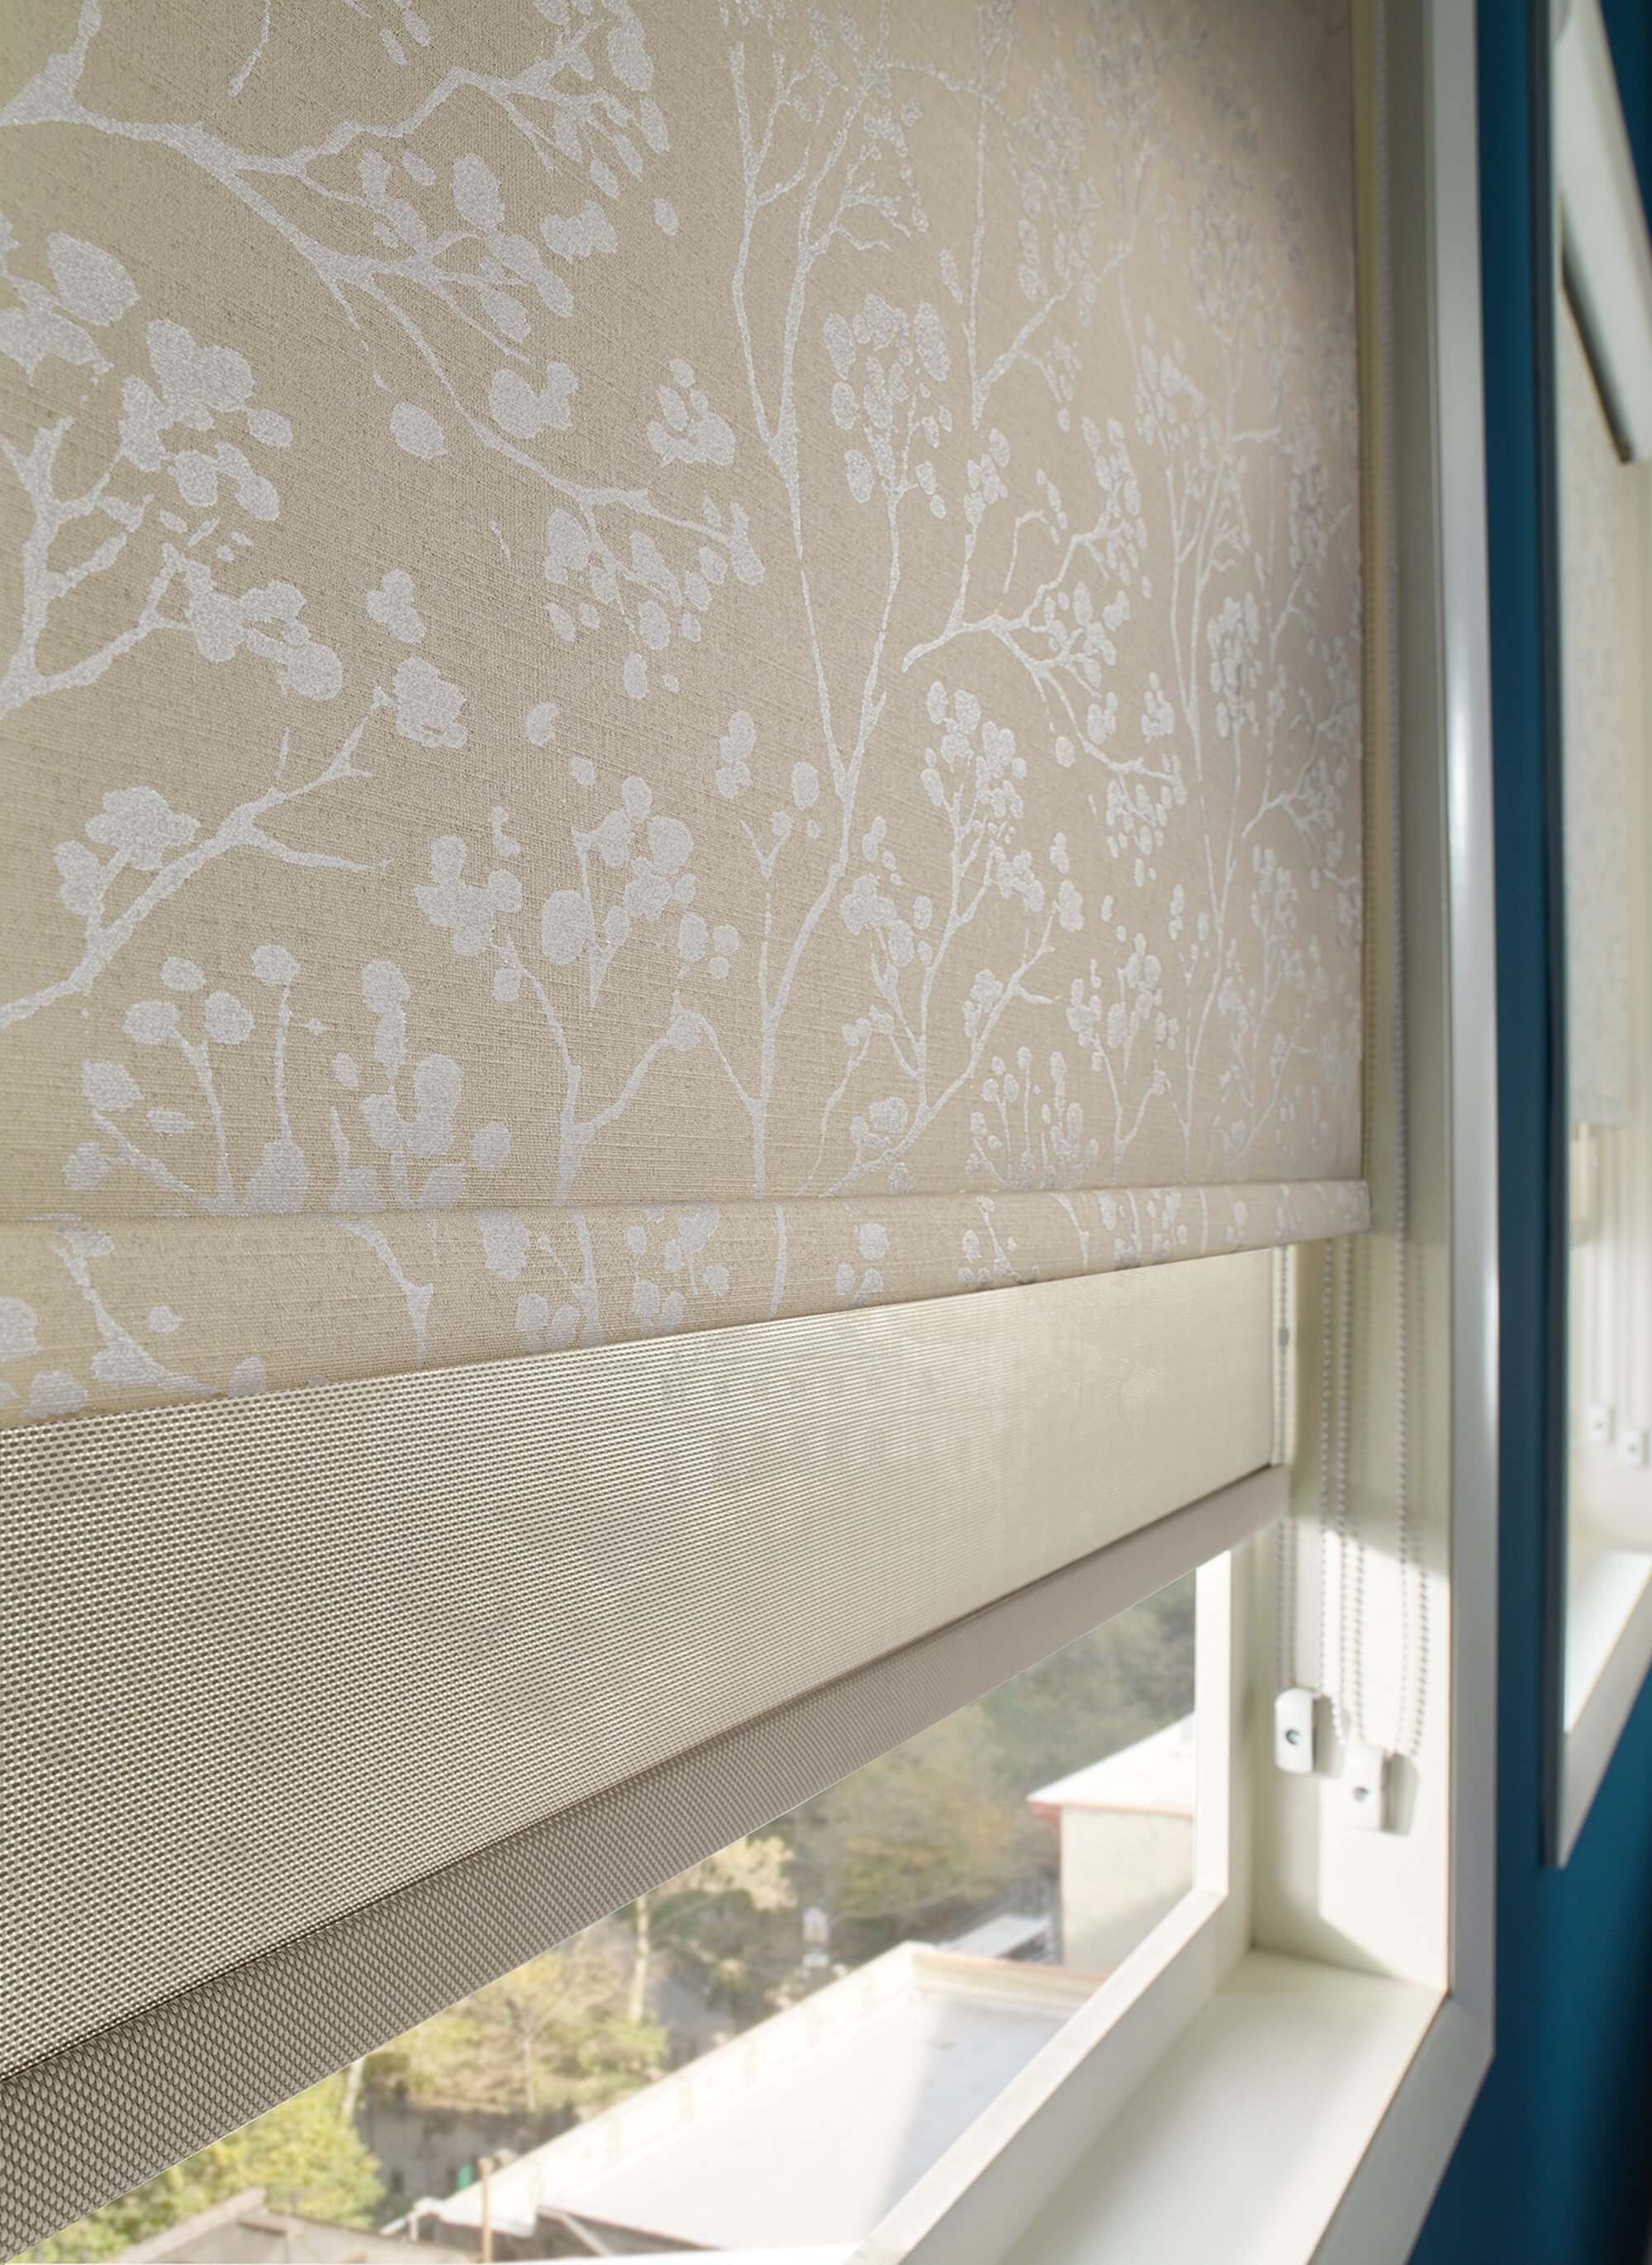 Window Blind Cord Safety - Make Corded Window Coverings Safe for Kids